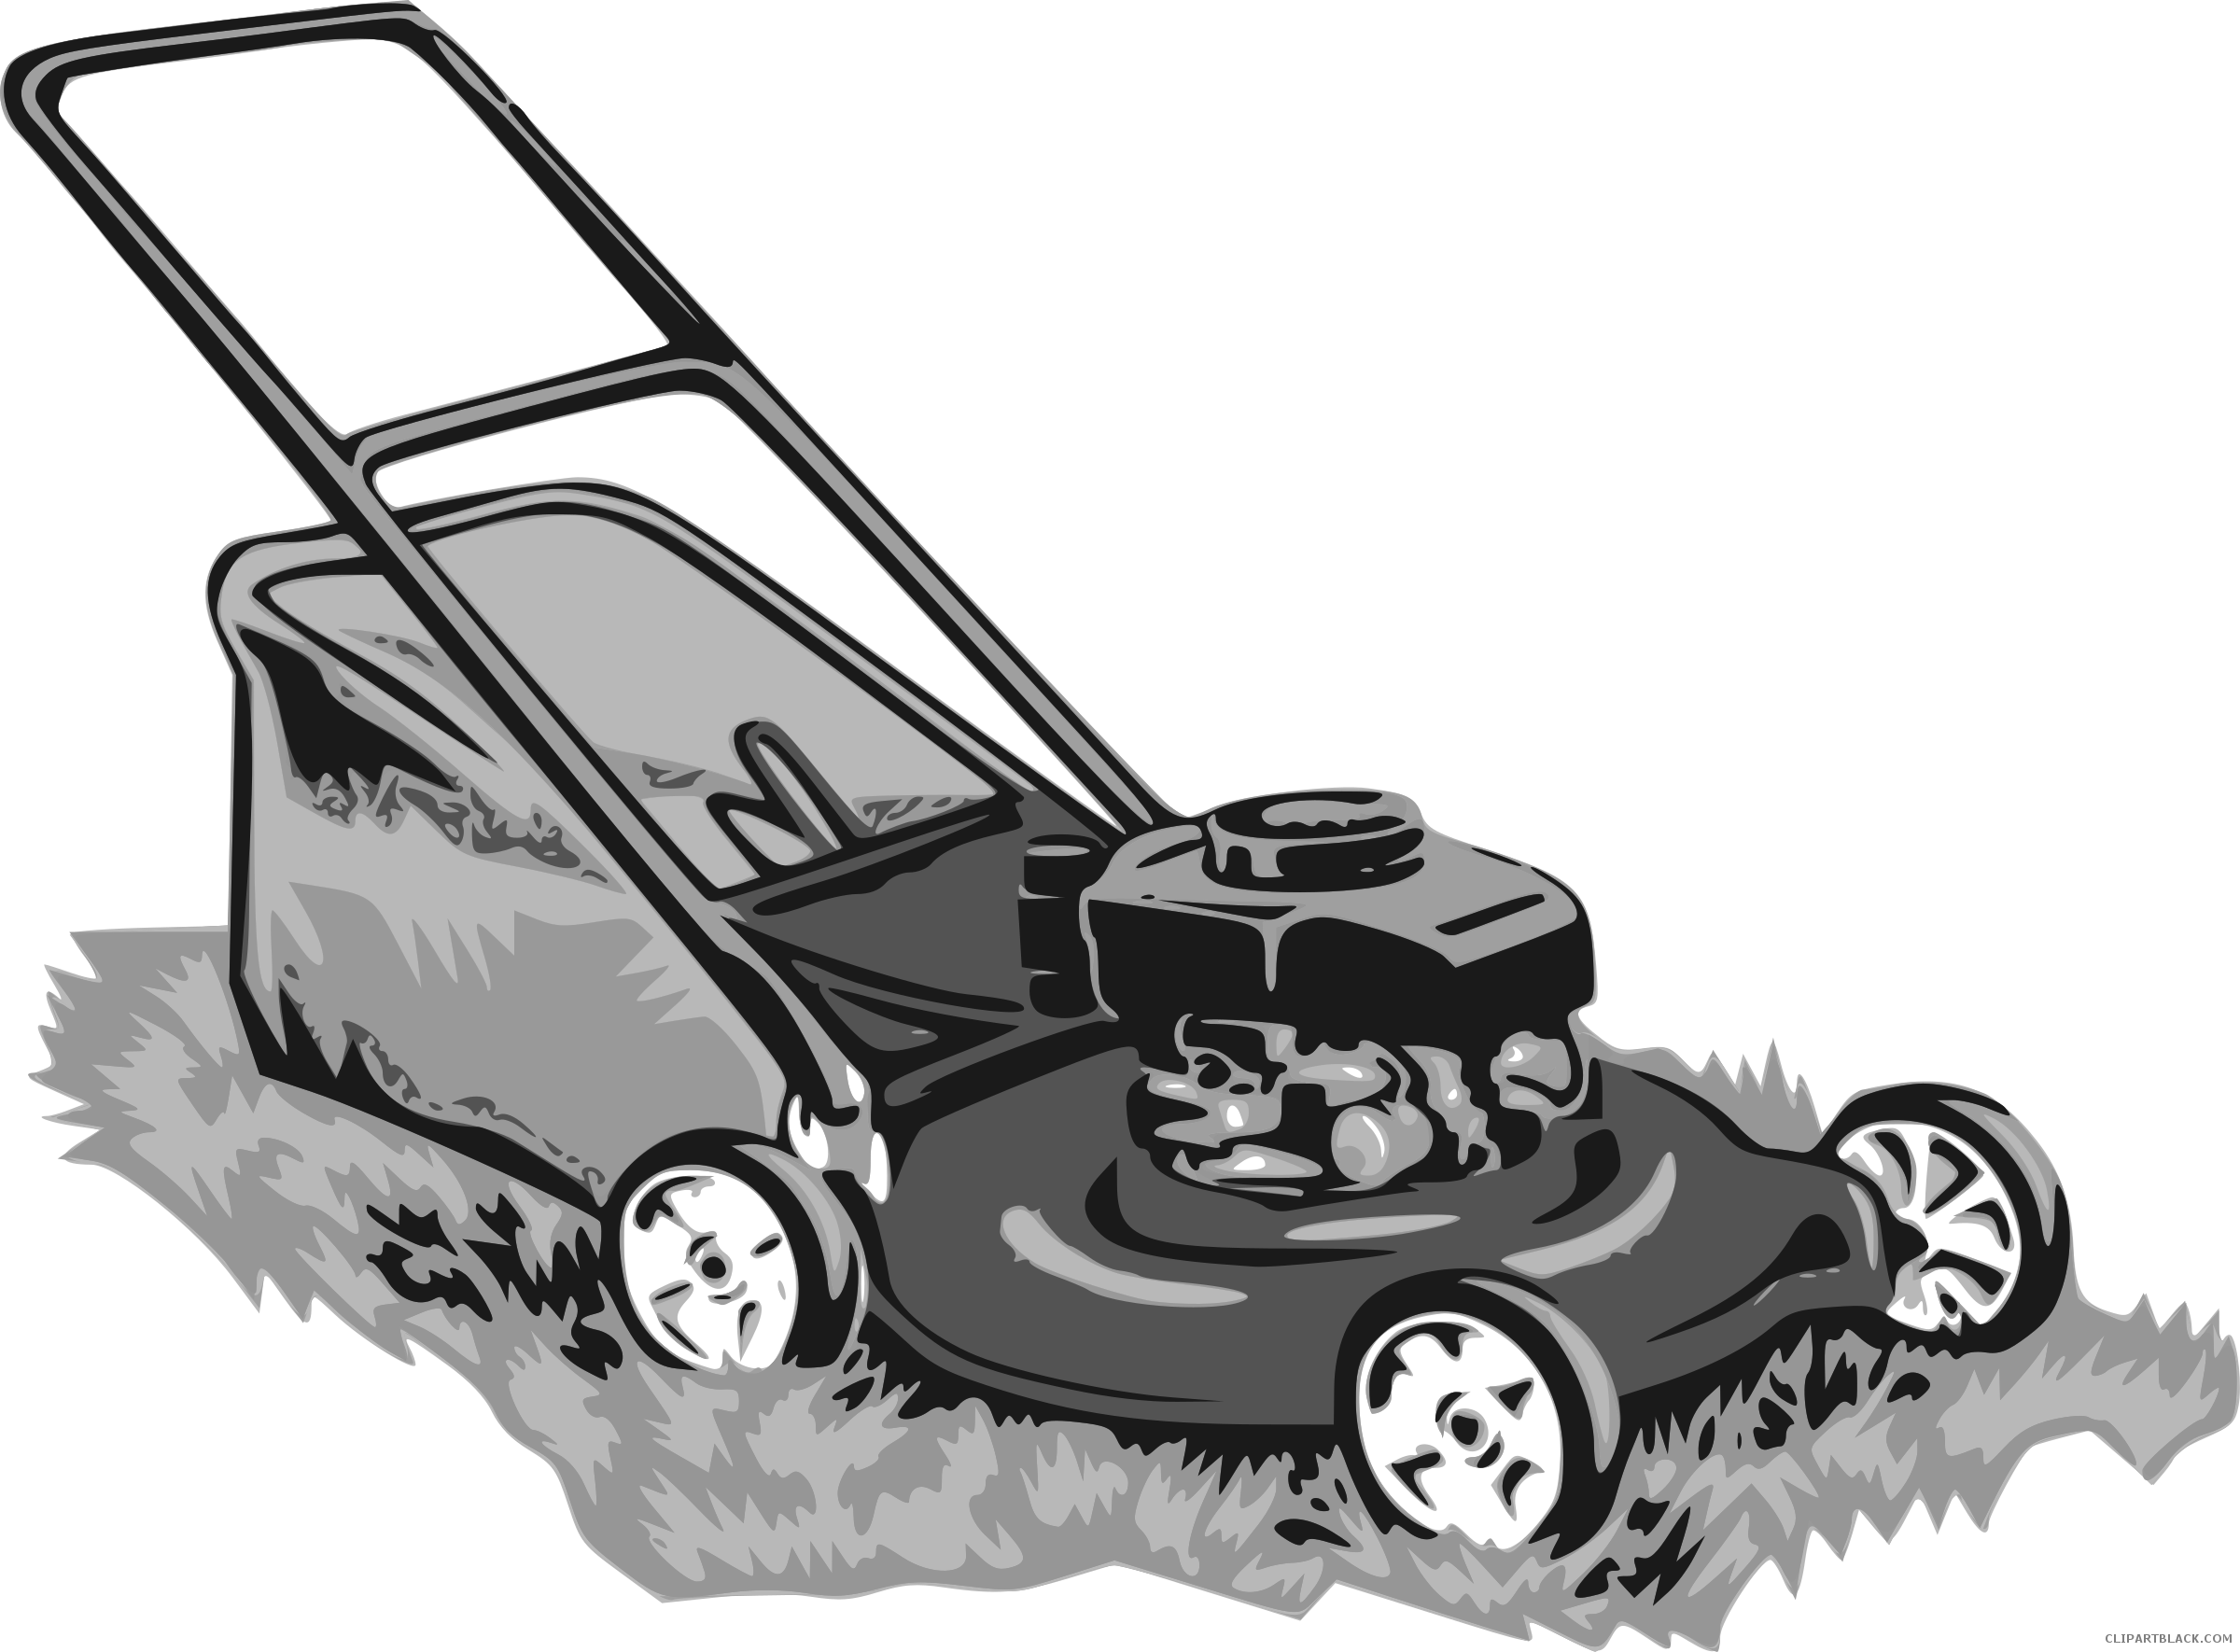 mowing clipart black and white